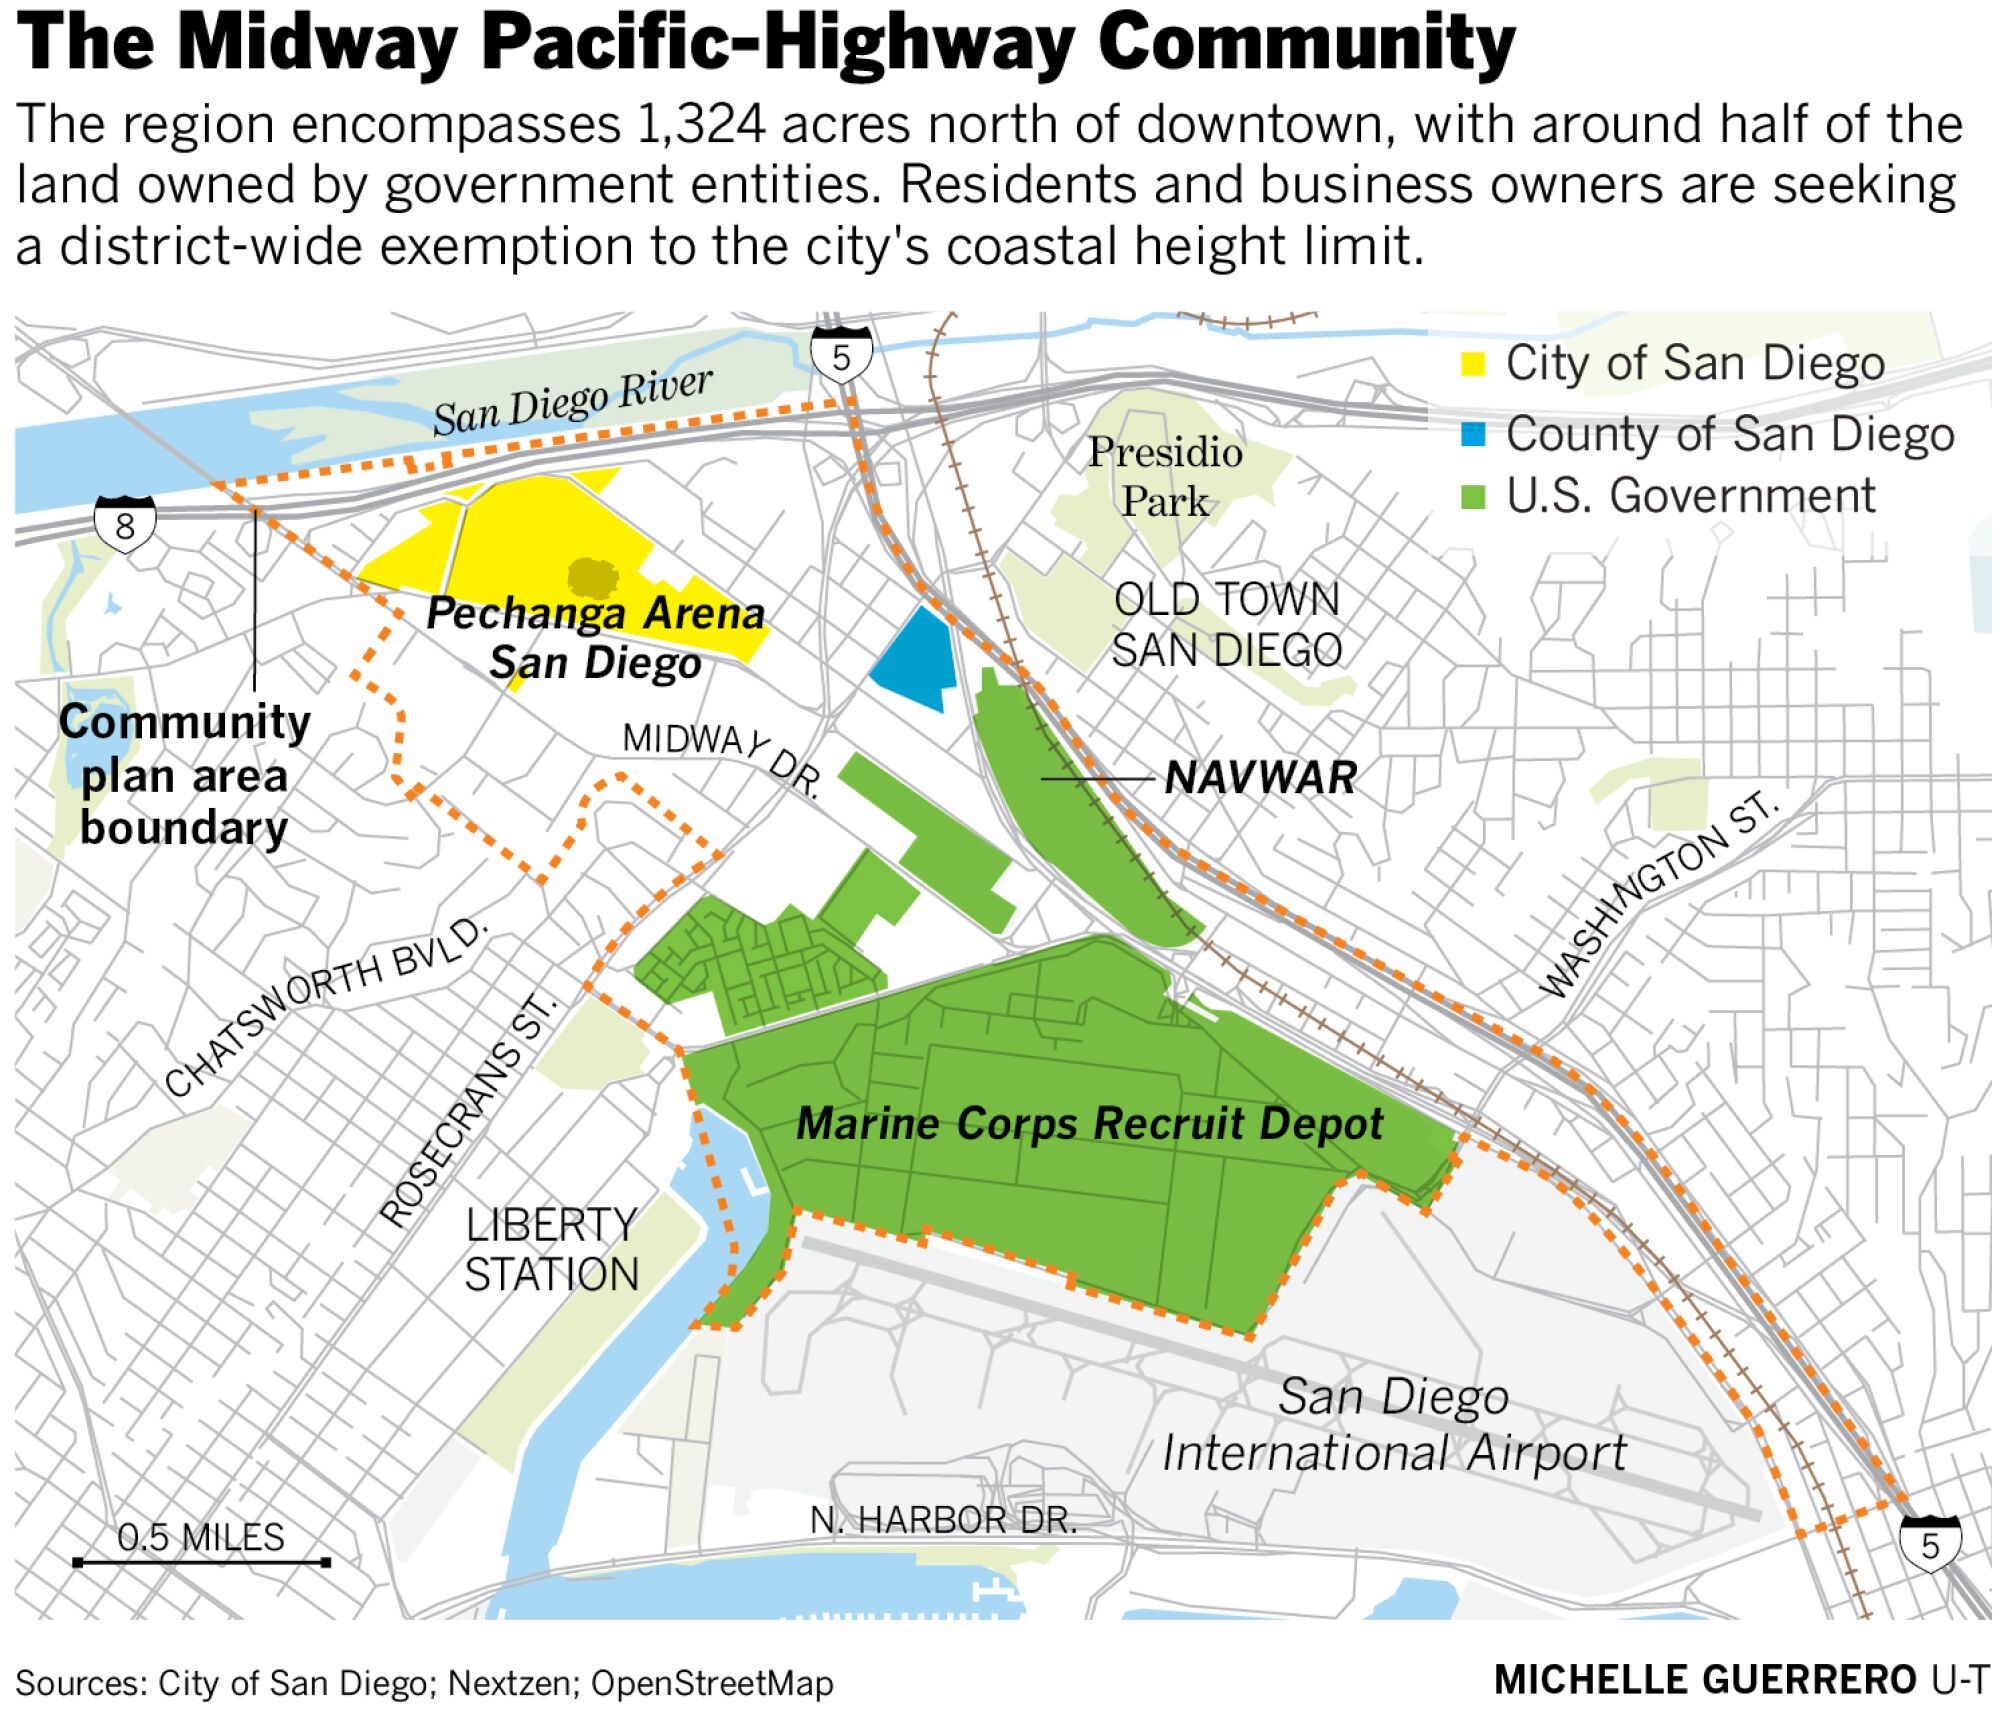 The Midway Pacific-Highway Community